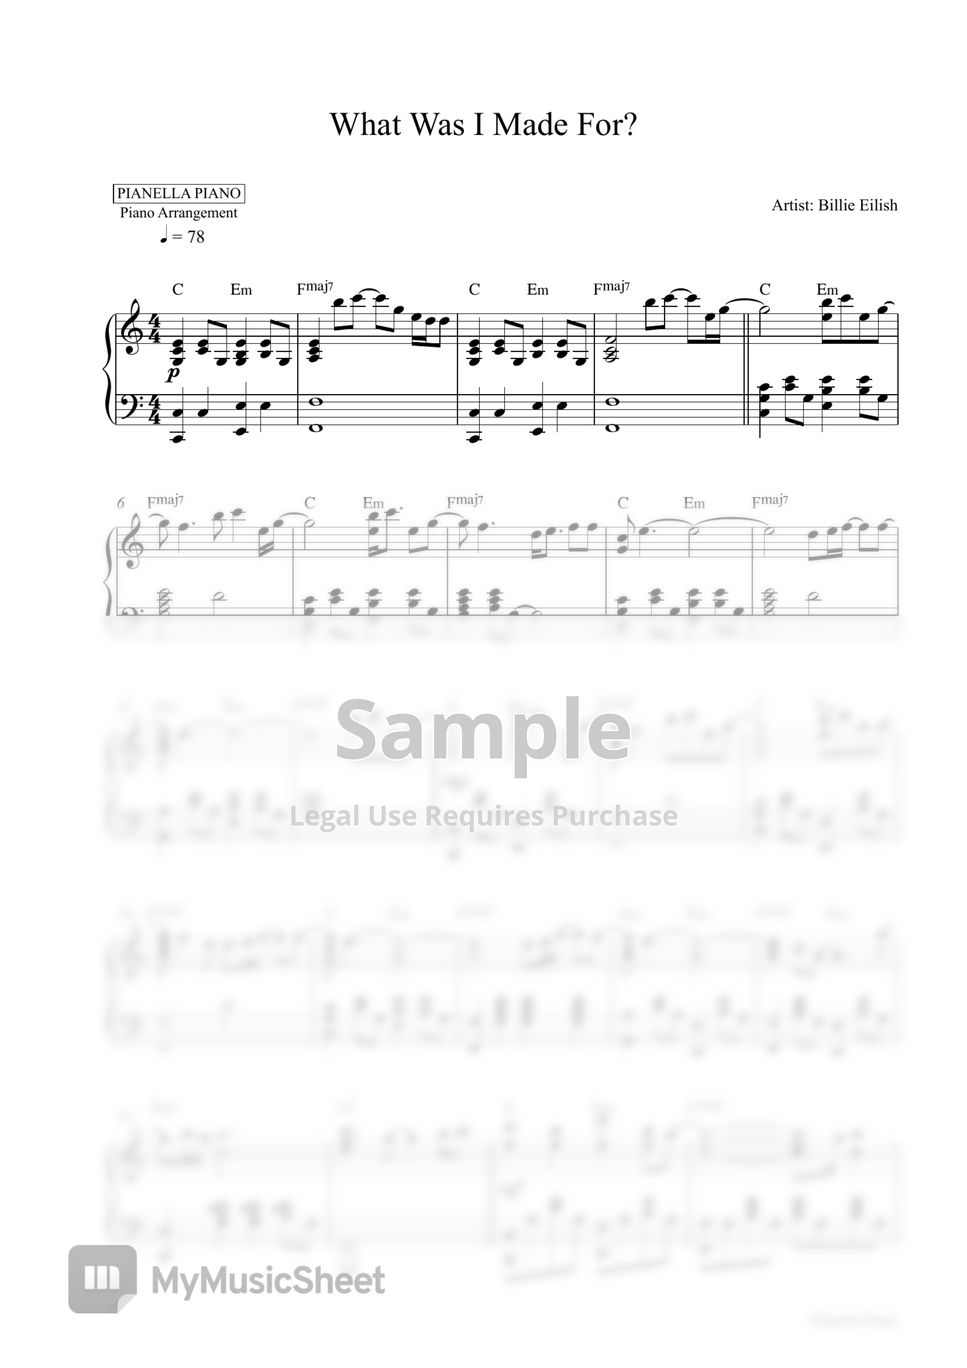 Billie Eilish - What Was I Made For? (Piano Sheet - Special Price $2) by Pianella Piano